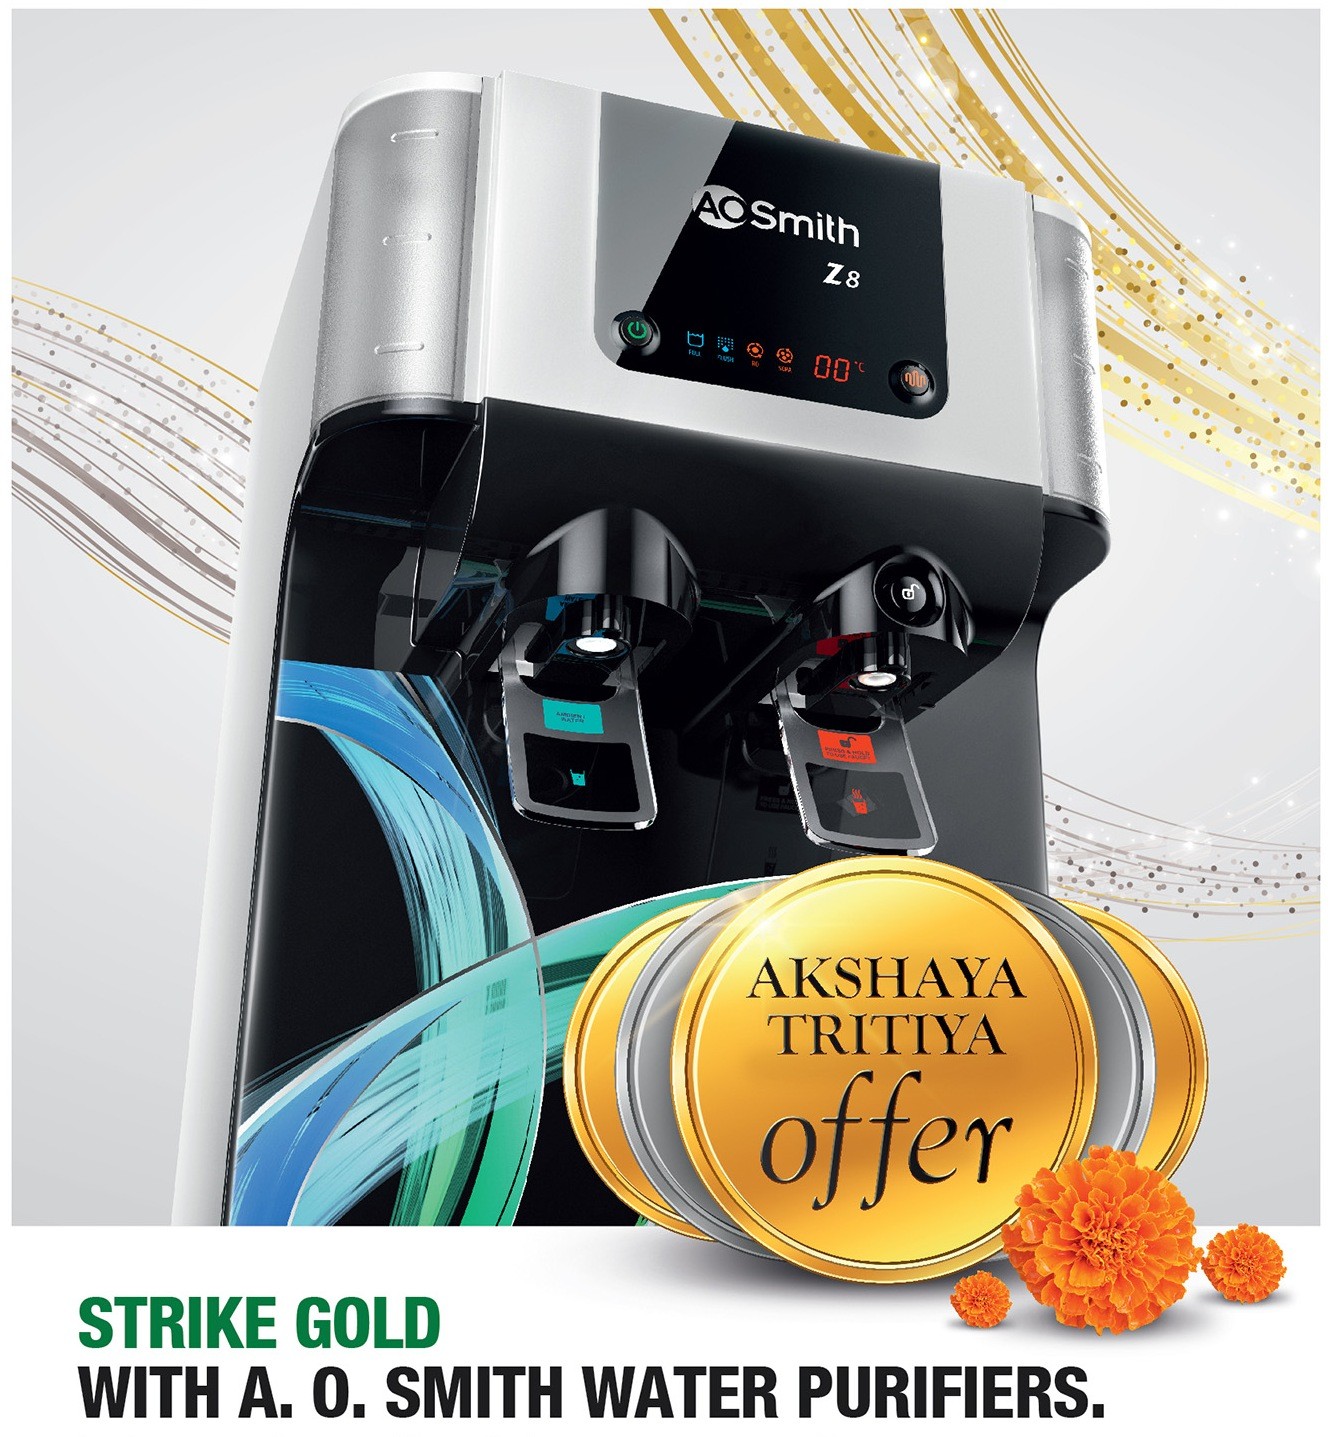 A.O. Smith announces attractive “Akshaya Tritiya Offer” on Water Purifiers decoding=